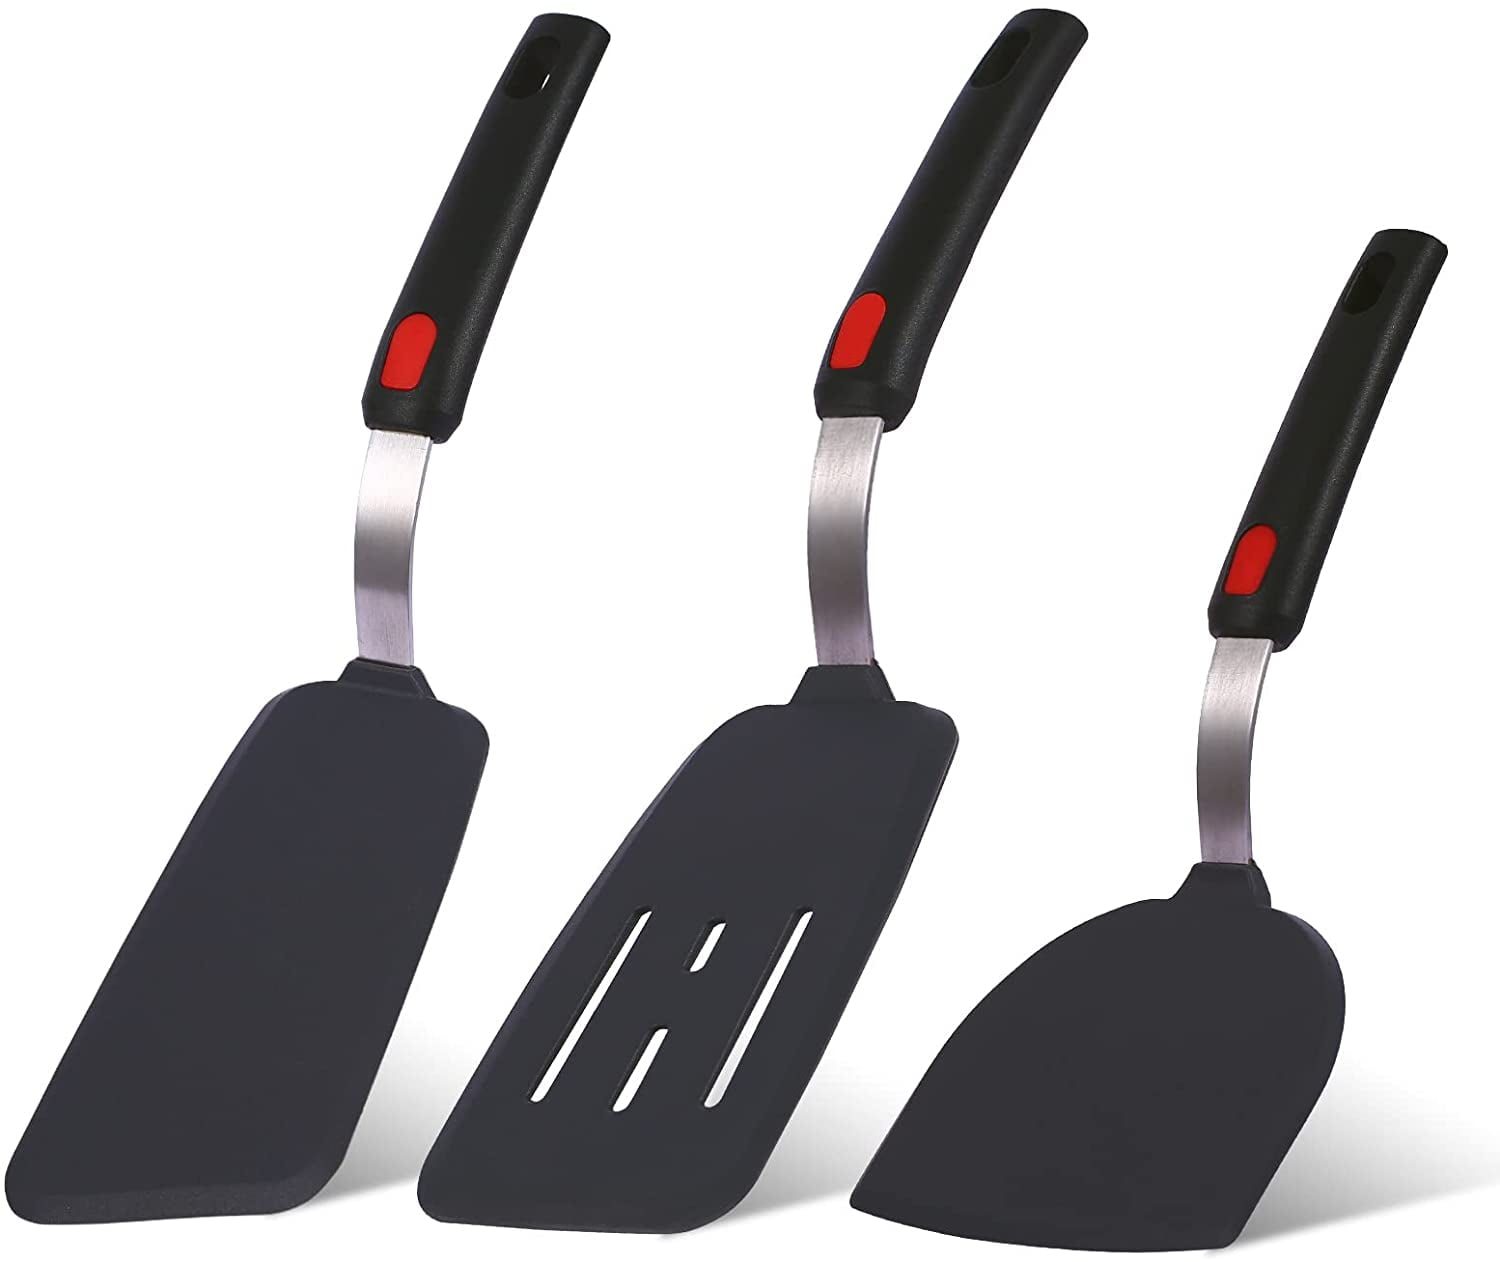 Mercer Culinary Hell's Tools® Black Slotted Spatula (12)